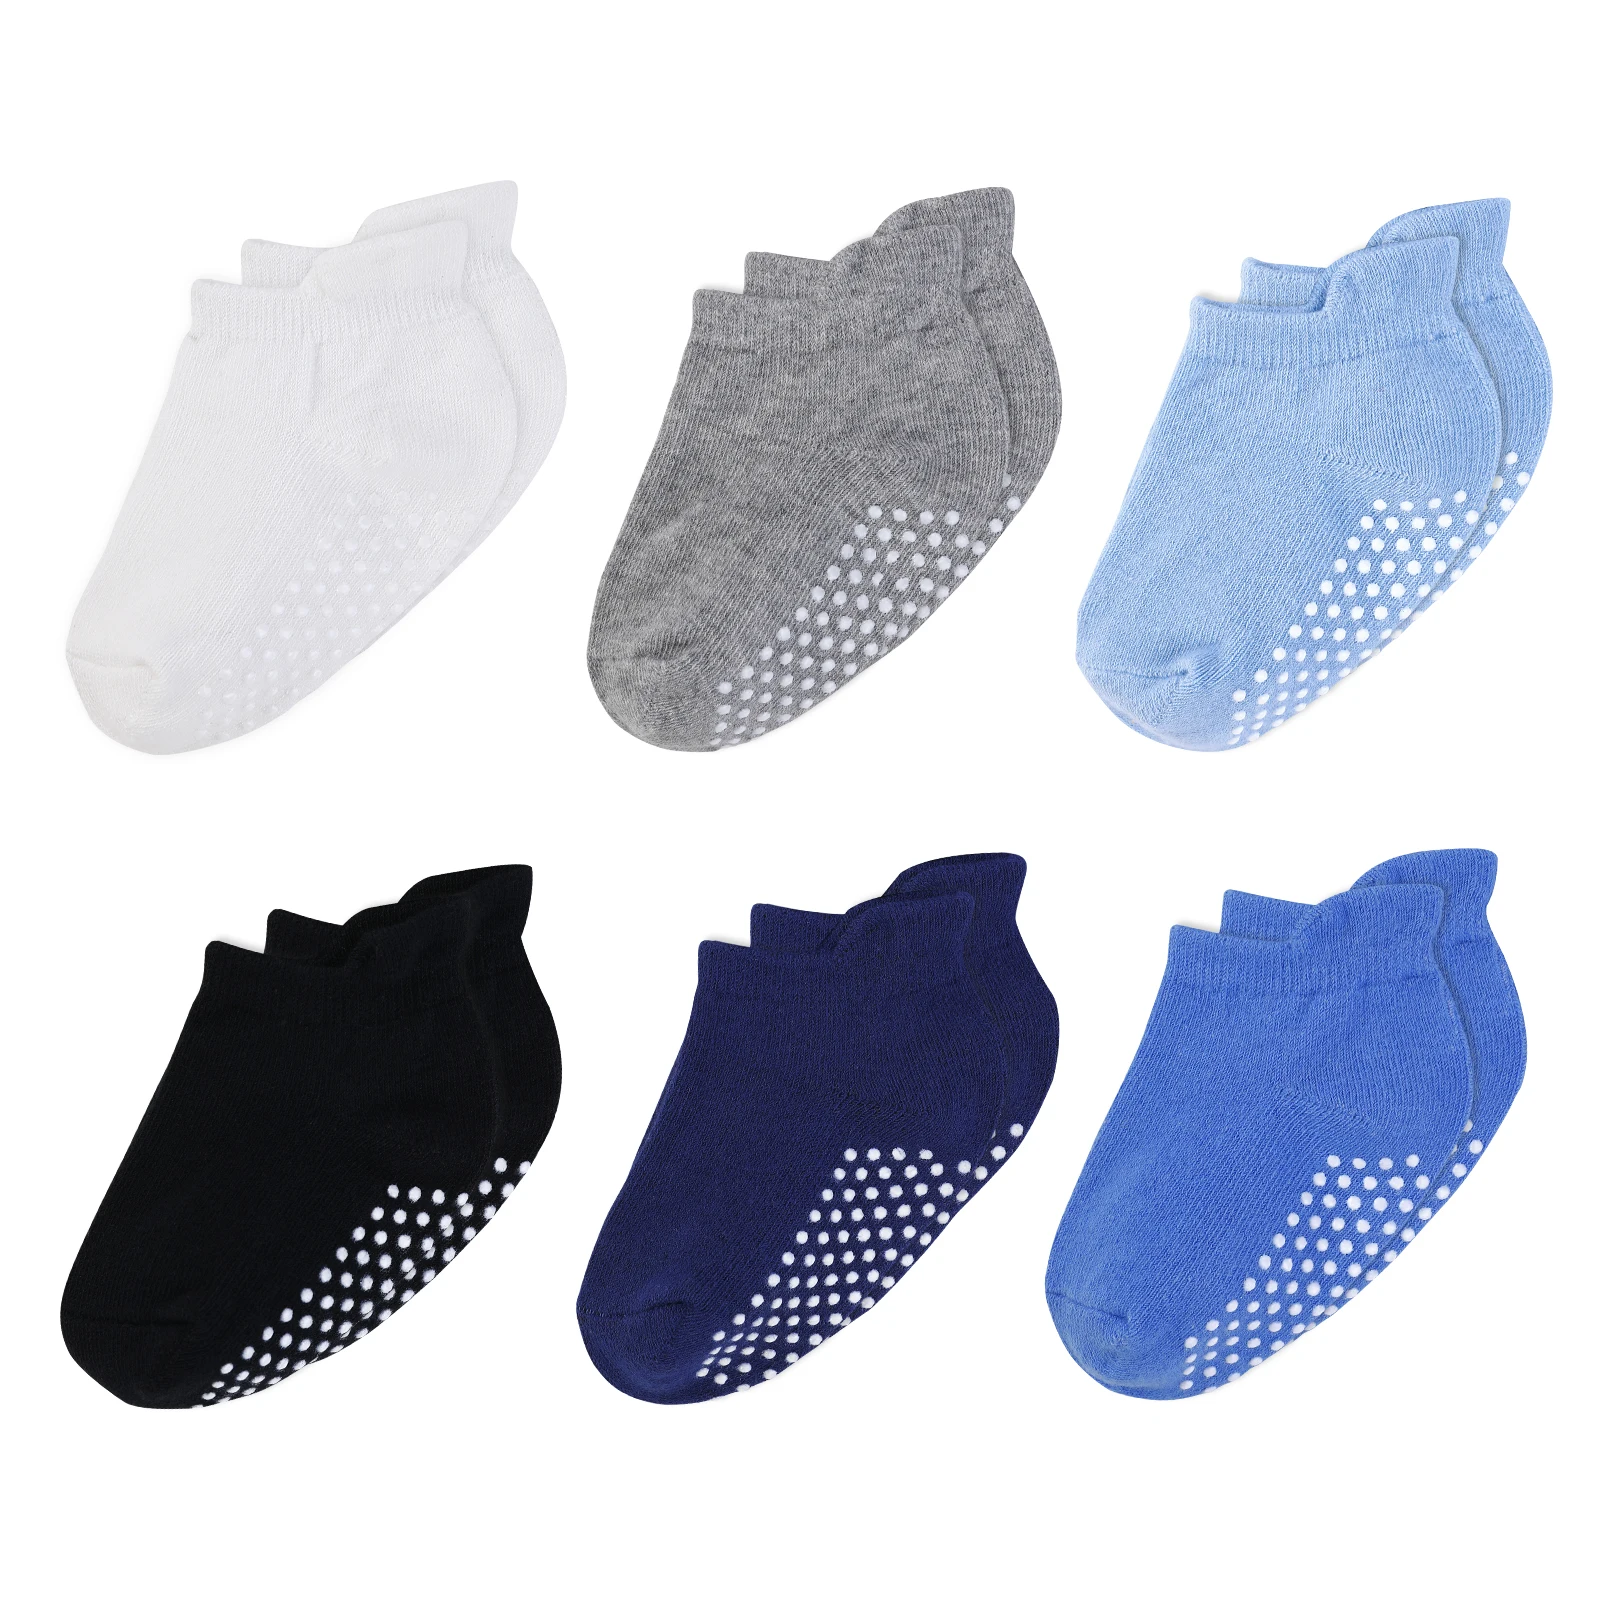 

6Pairs/Lot Baby Socks 100% Organic Cotton Baby Ankle Socks with Non Skid Soles Unisex Anti Skid Baby Sock for Girls & Boys